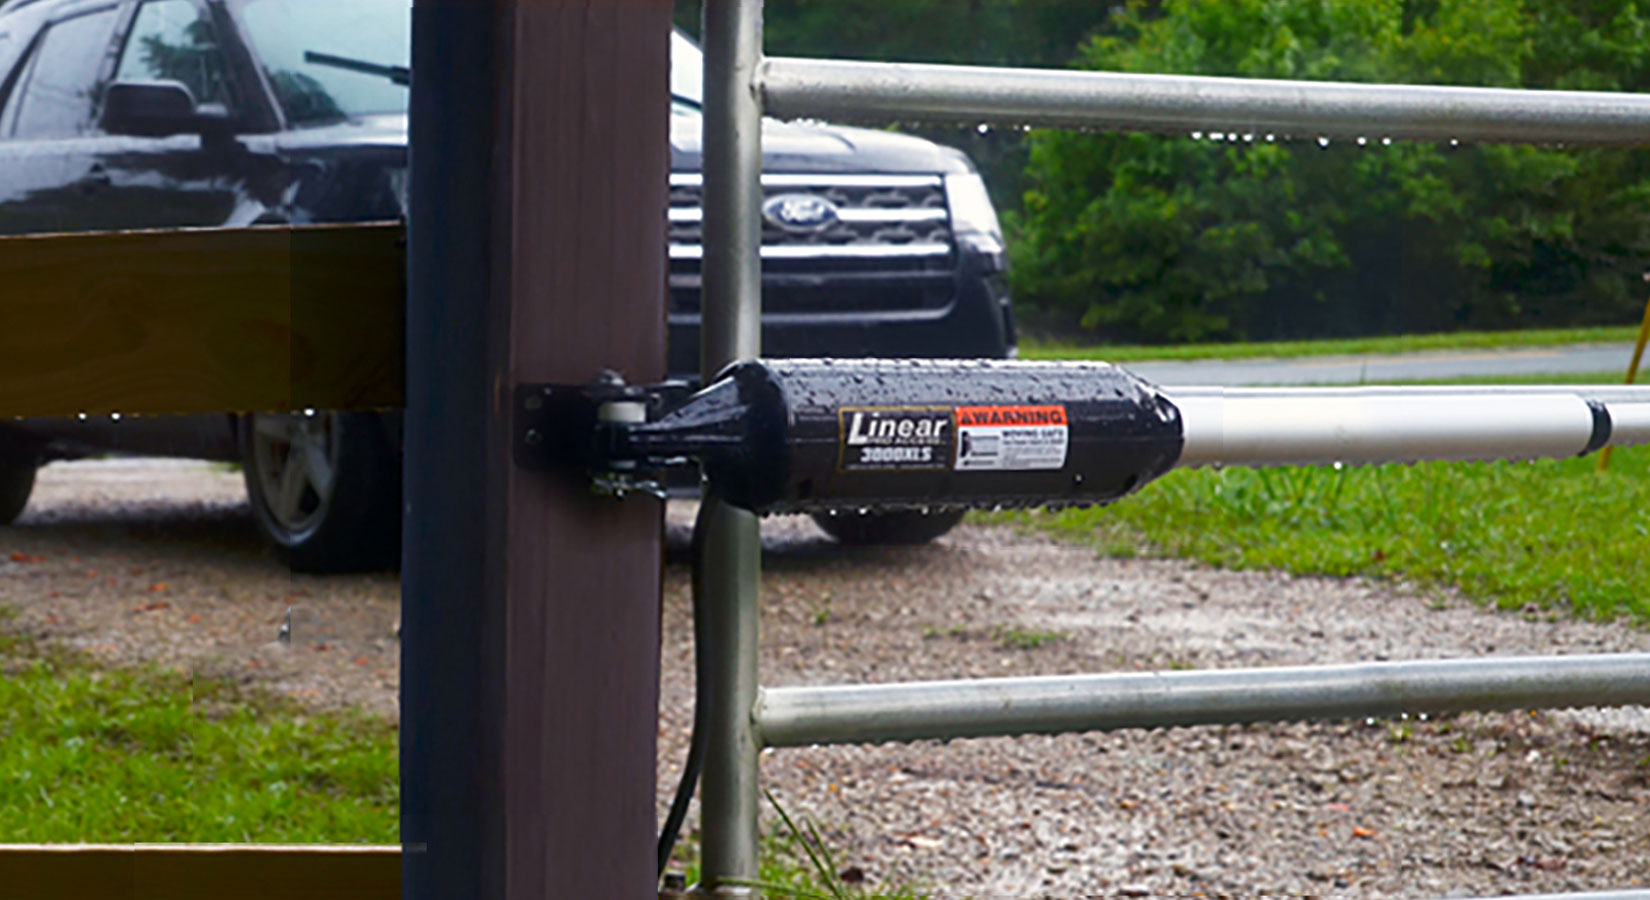 Linear Gate Opener - Seamless Functionality and Reliability | All Security Equipment